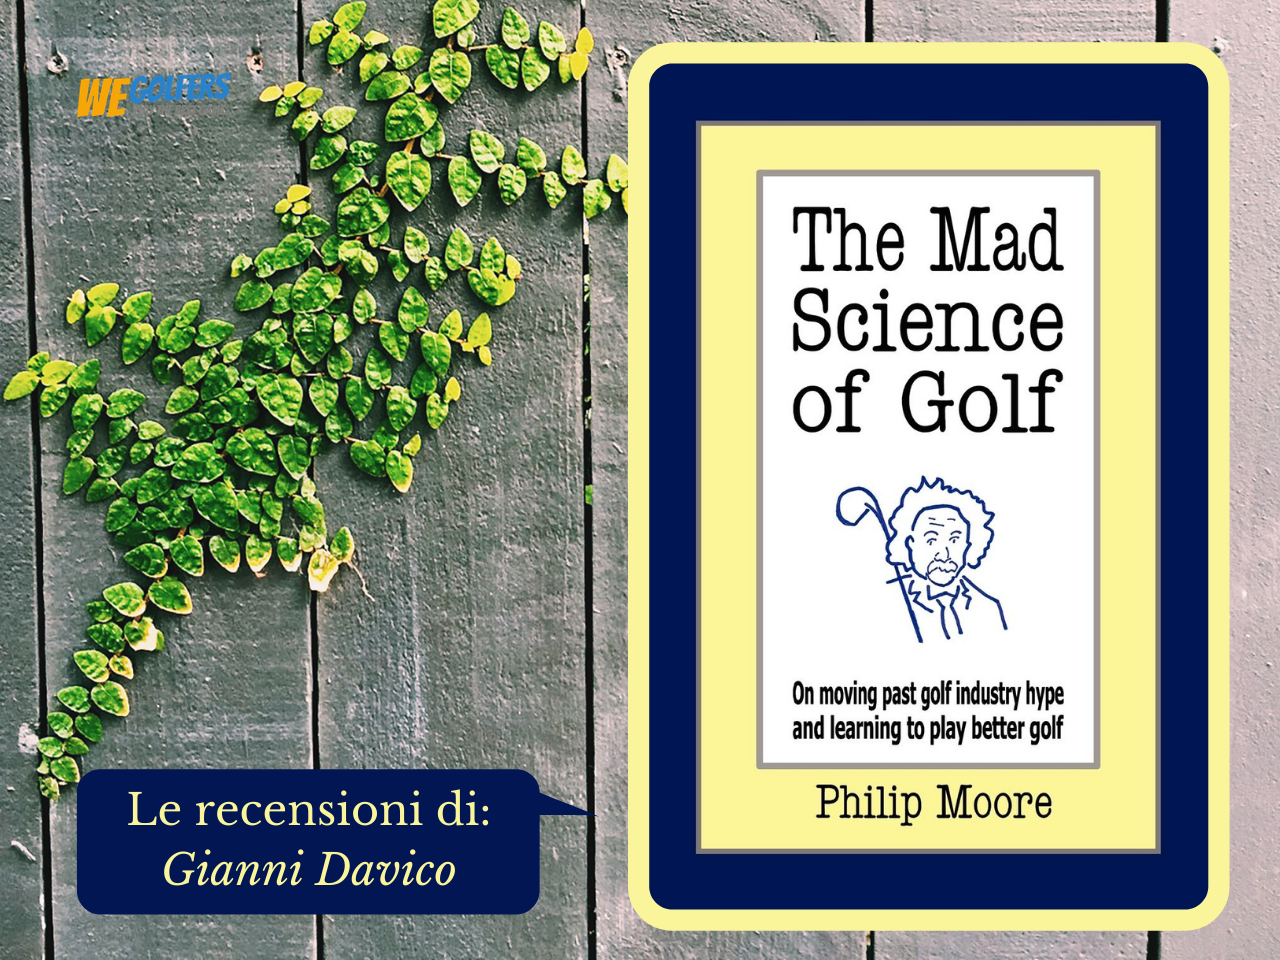 The Mad Science of Golf - Philip Moore - Le recensioni di Gianni Davico Davico_The_Mad_Science_of_Golf